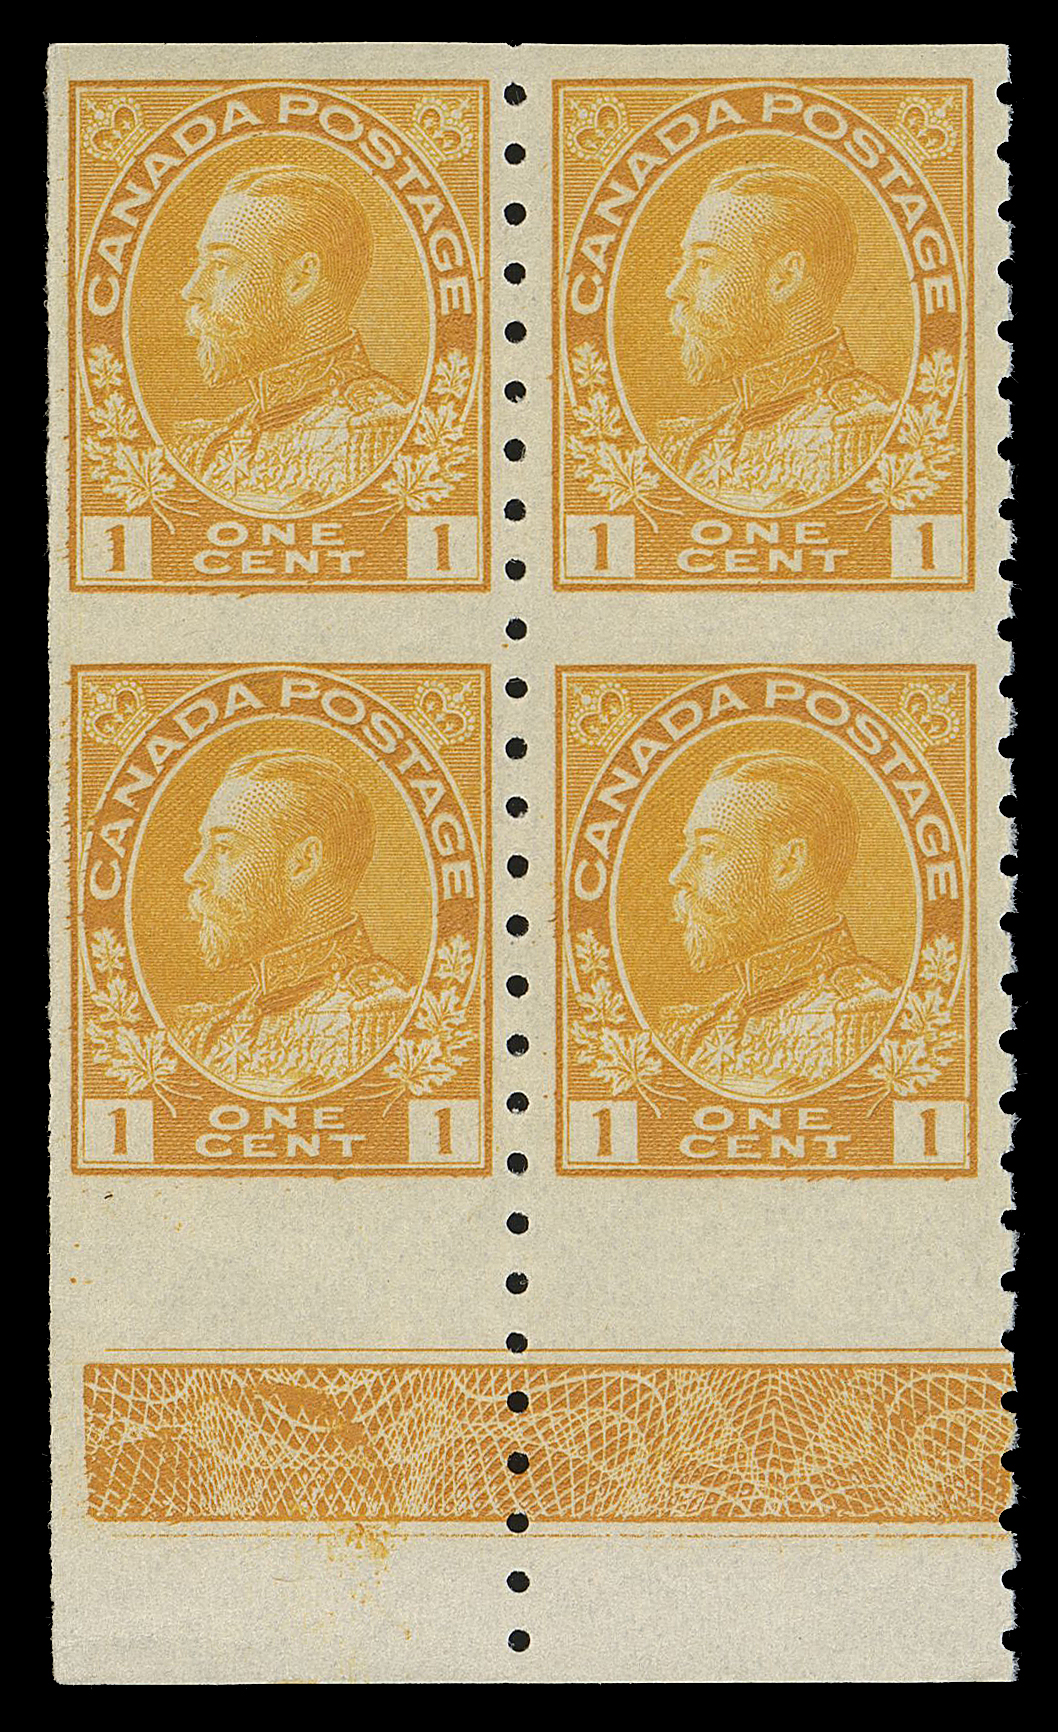 ADMIRAL STAMPS  126c,Very well centered block imperforate horizontally, from the lower left position with natural straight edge at left, displaying full strength Type B lathework, LH at top left, right pair is NH, XF (Unitrade cat. for right pair only)